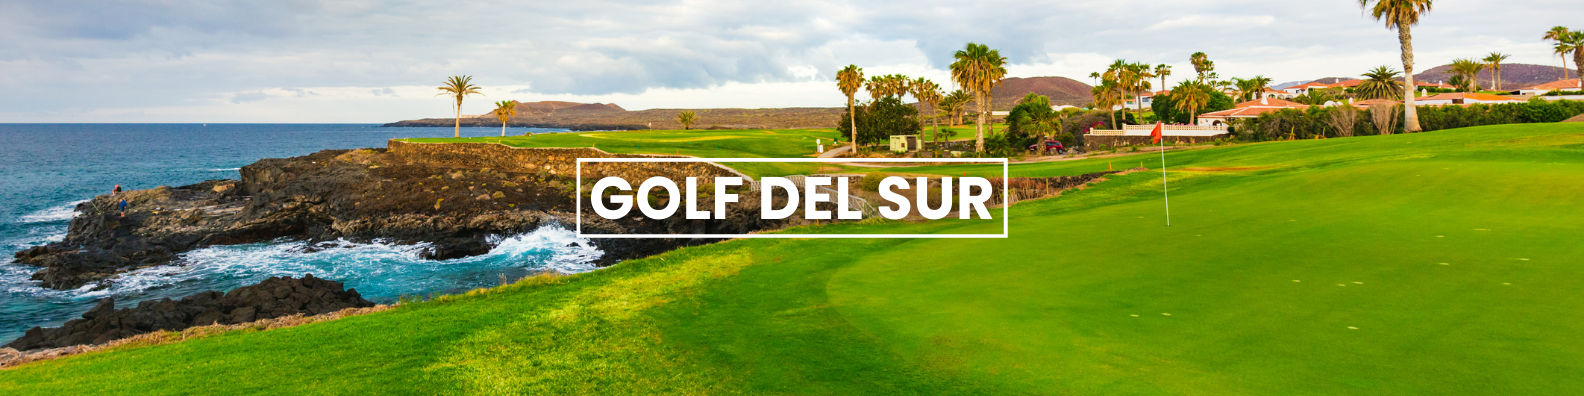 a golf course next to the ocean with a sign that says golf del sur .Barter's Travelnet